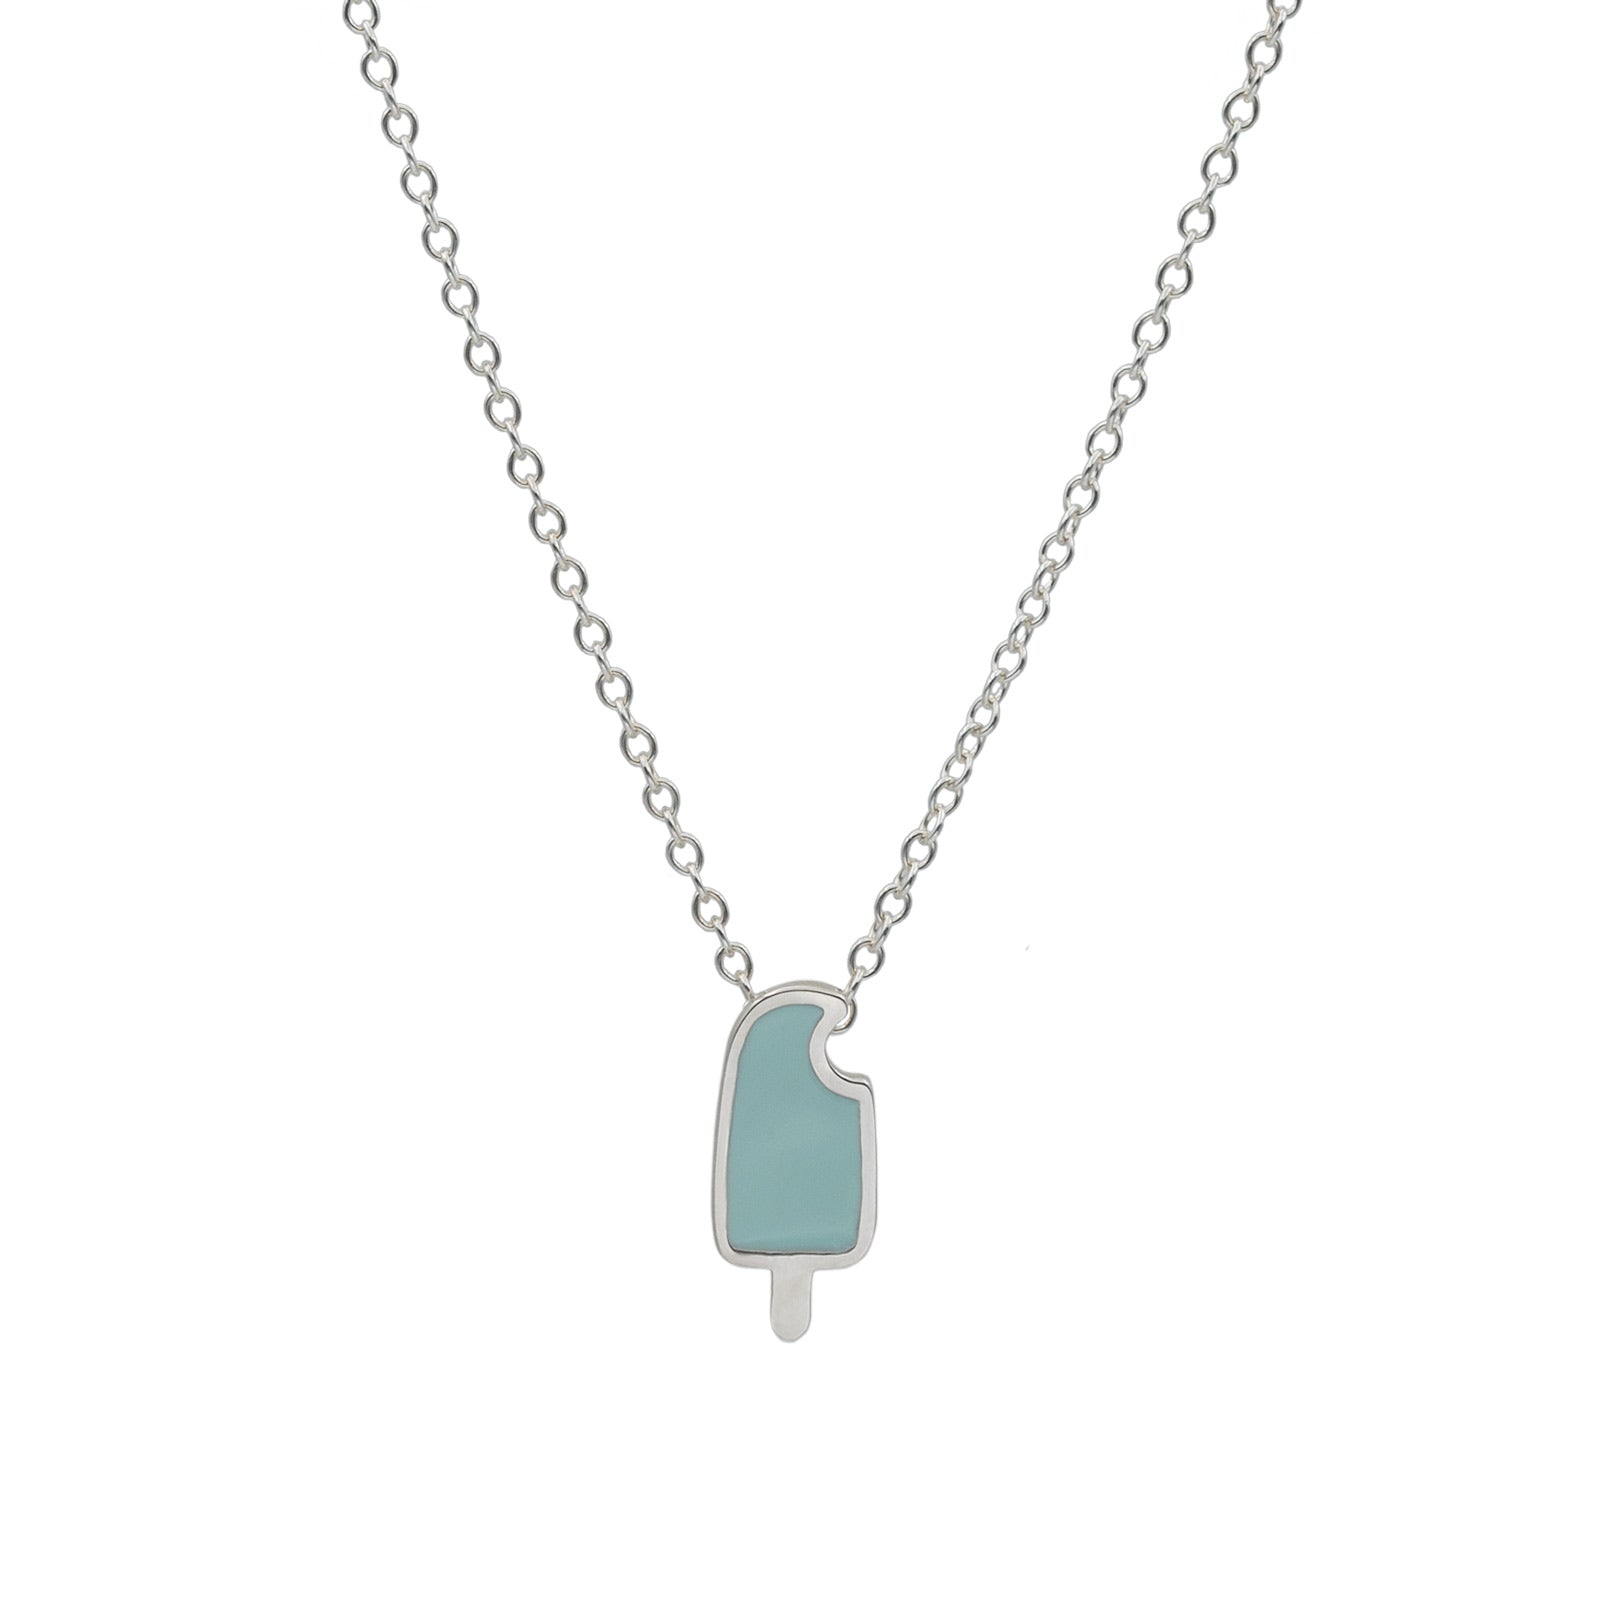 popsicle necklace in sterling silver with mint green enamel